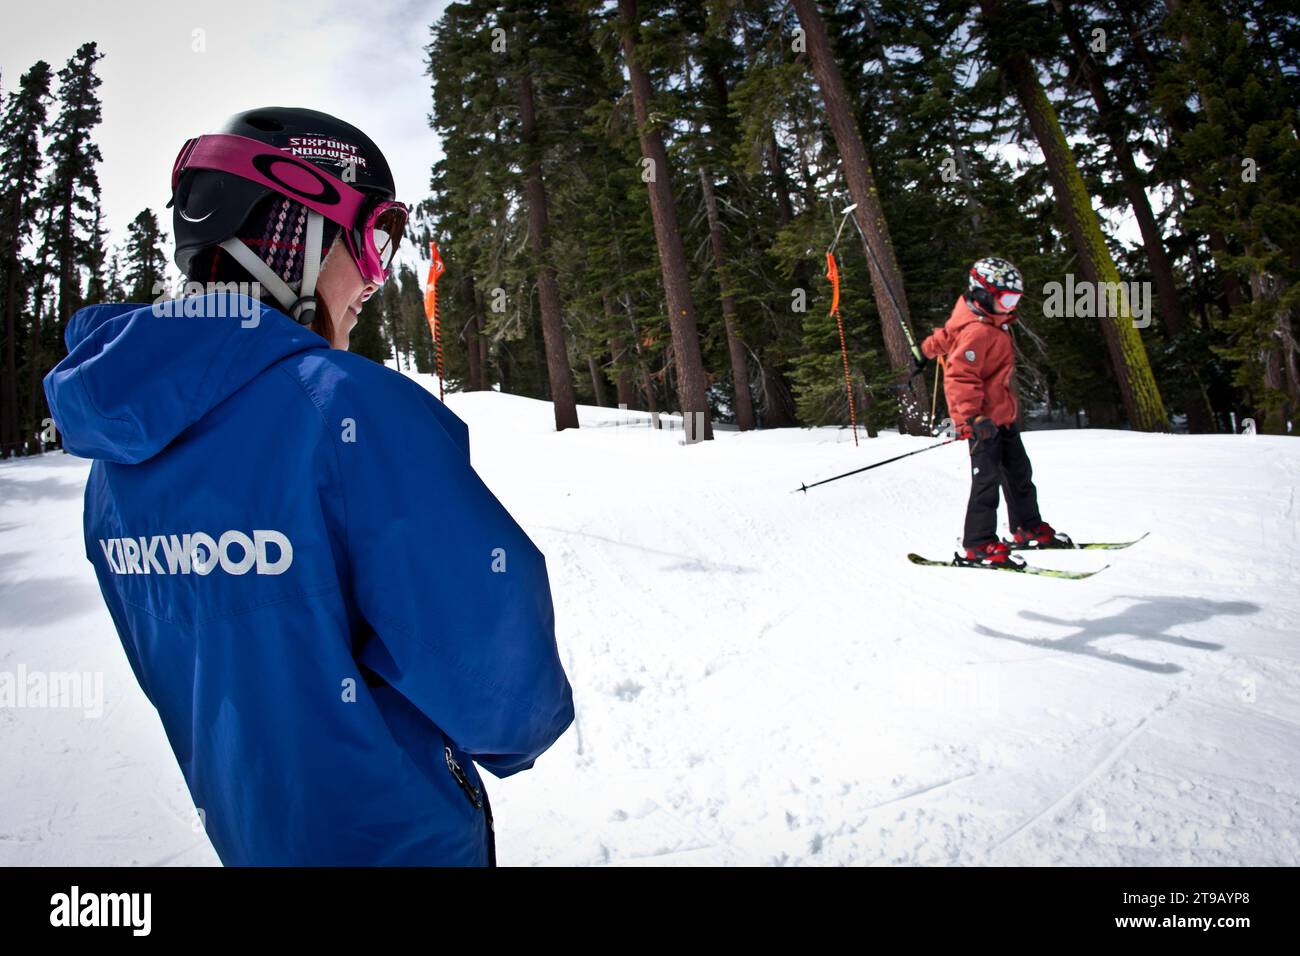 Young skier jumping in a terrain park while his instructor looks on. Stock Photo